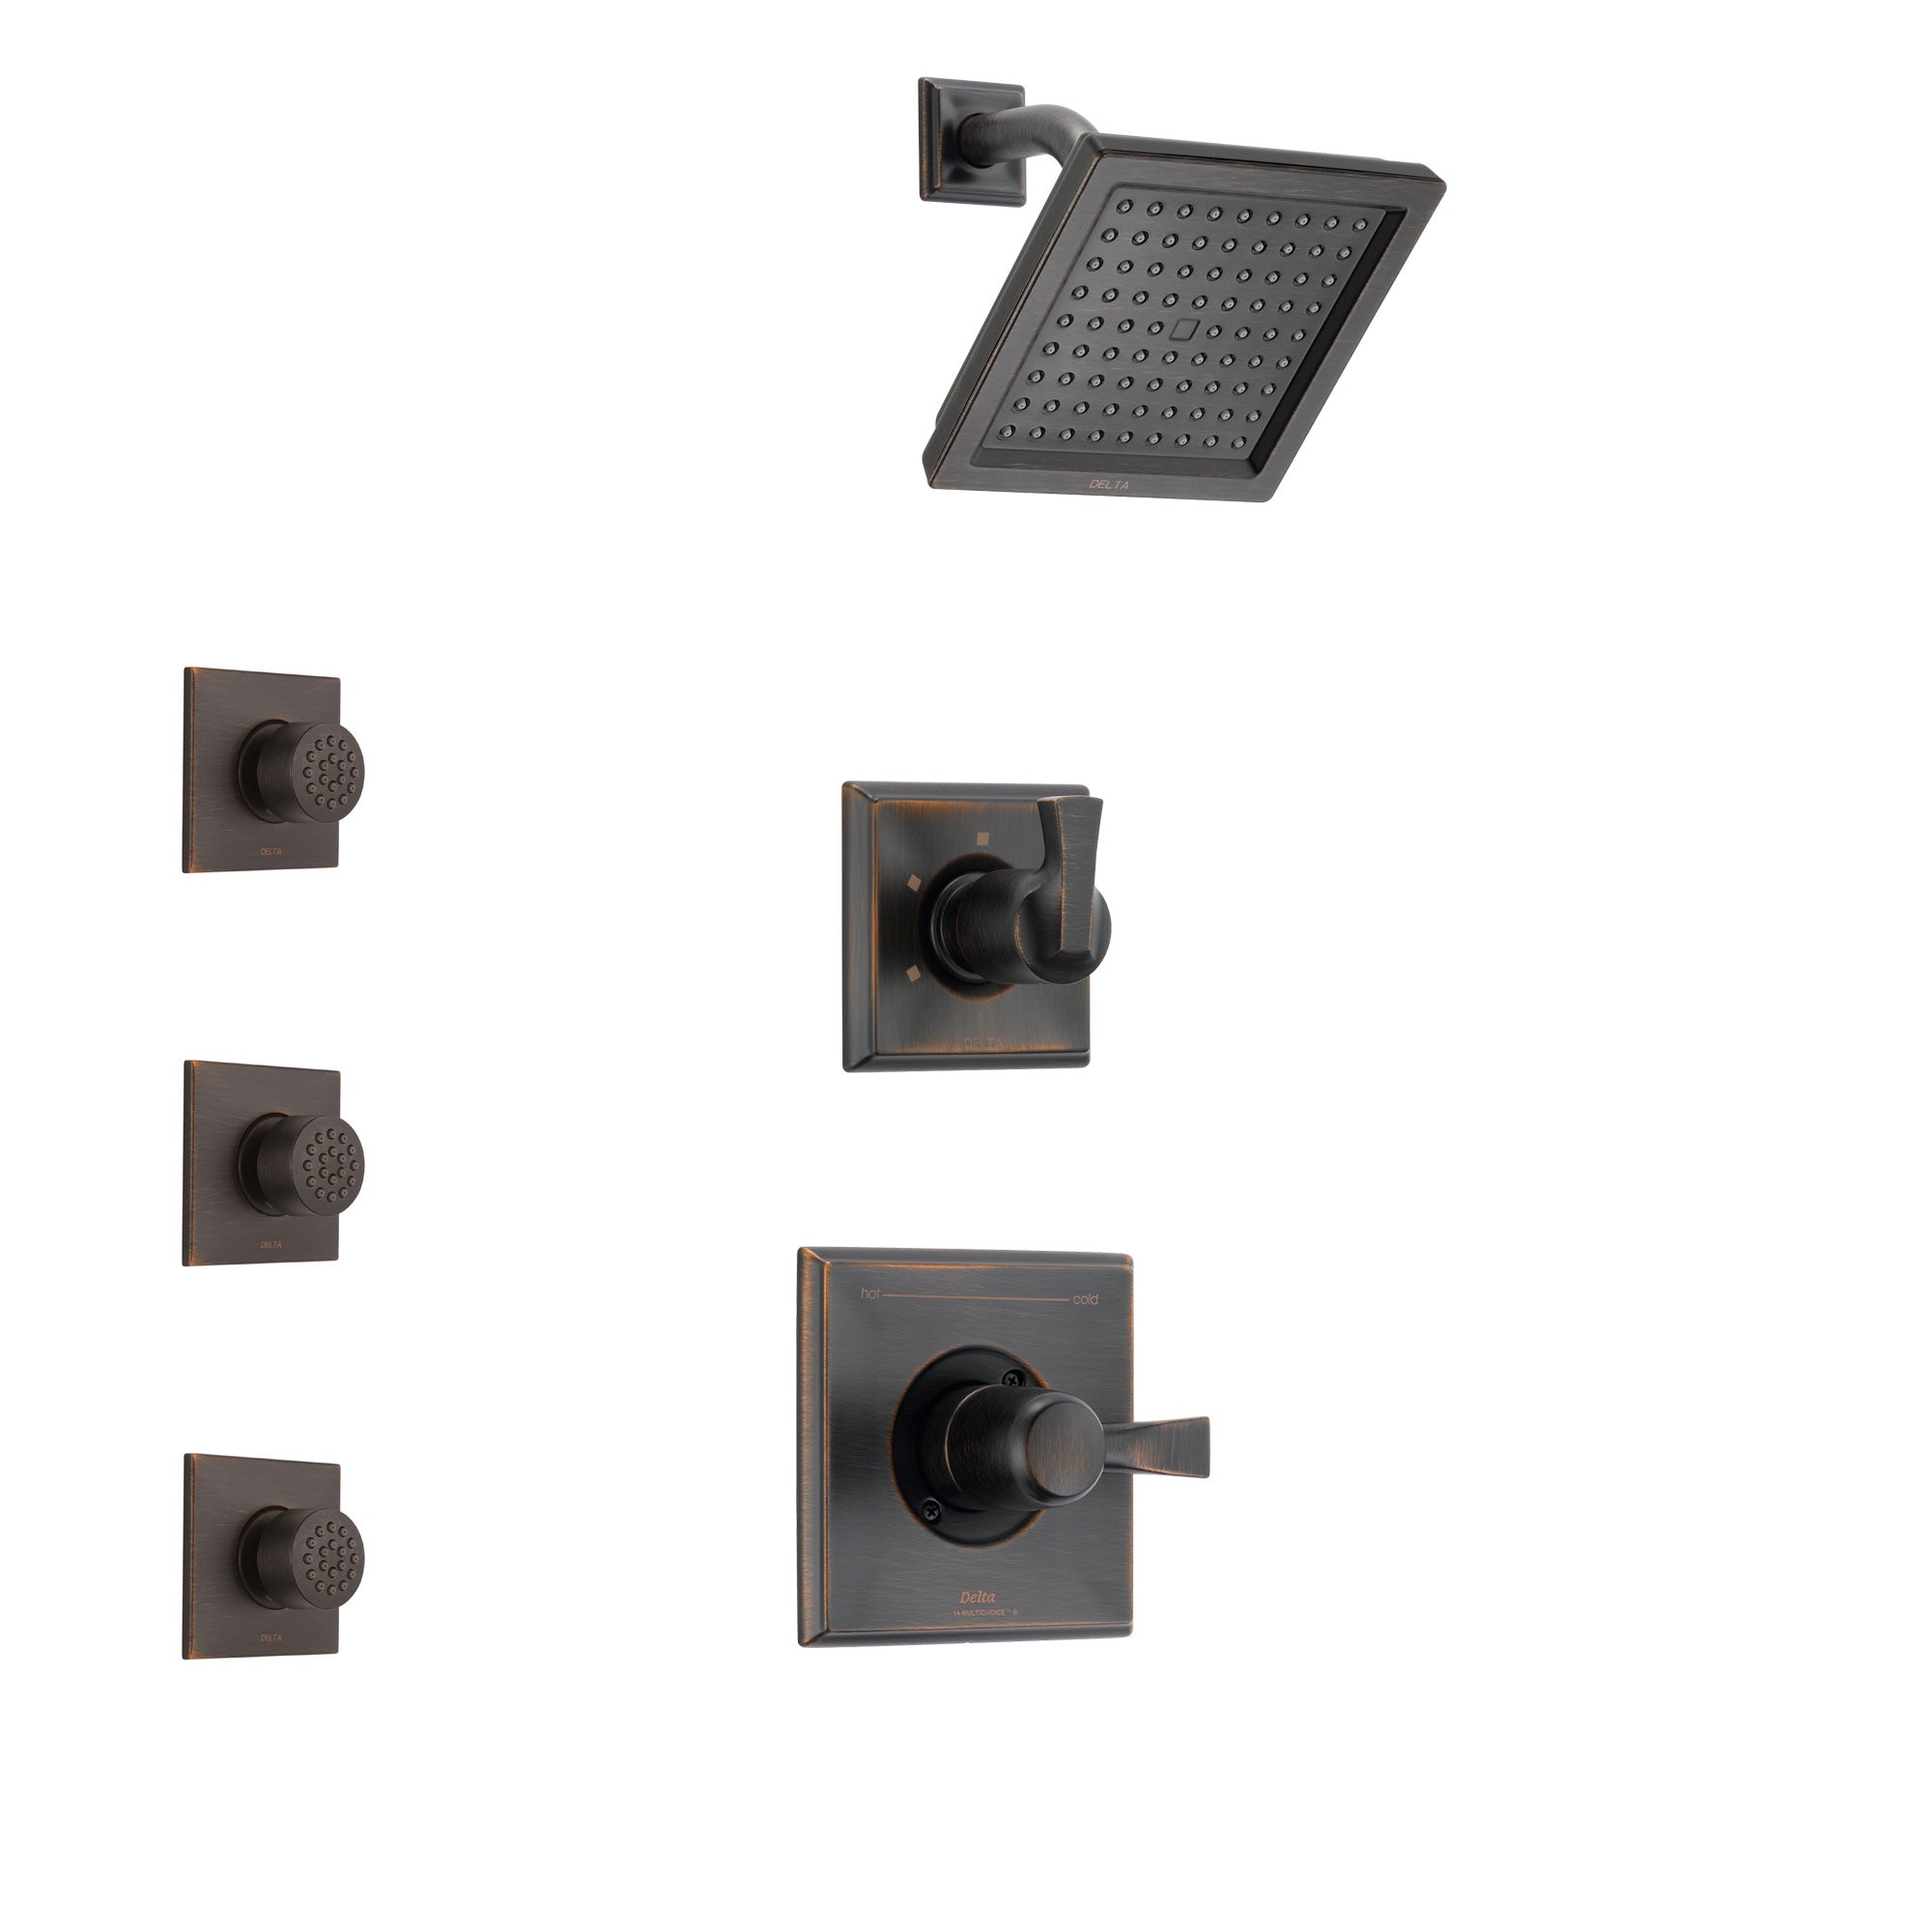 Delta Dryden Venetian Bronze Finish Shower System with Control Handle, 3-Setting Diverter, Showerhead, and 3 Body Sprays SS142511RB2